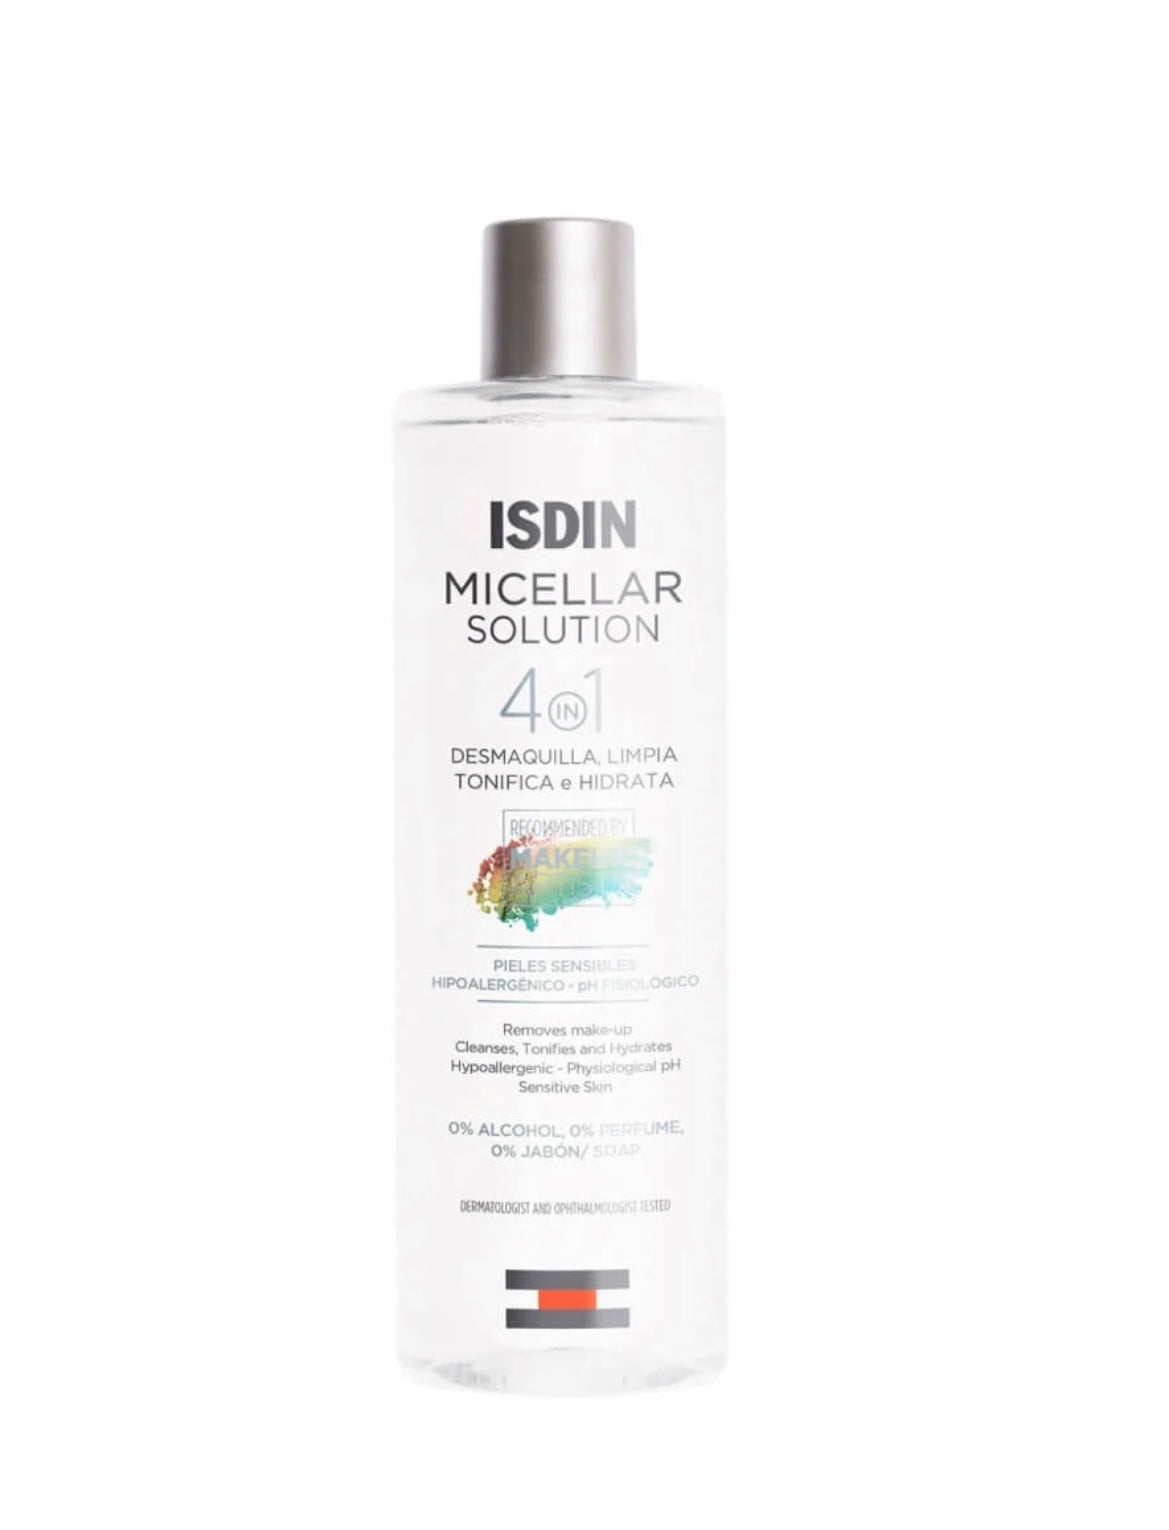 Gentle Cleanse with ISDIN MICELLAR SOLUTION